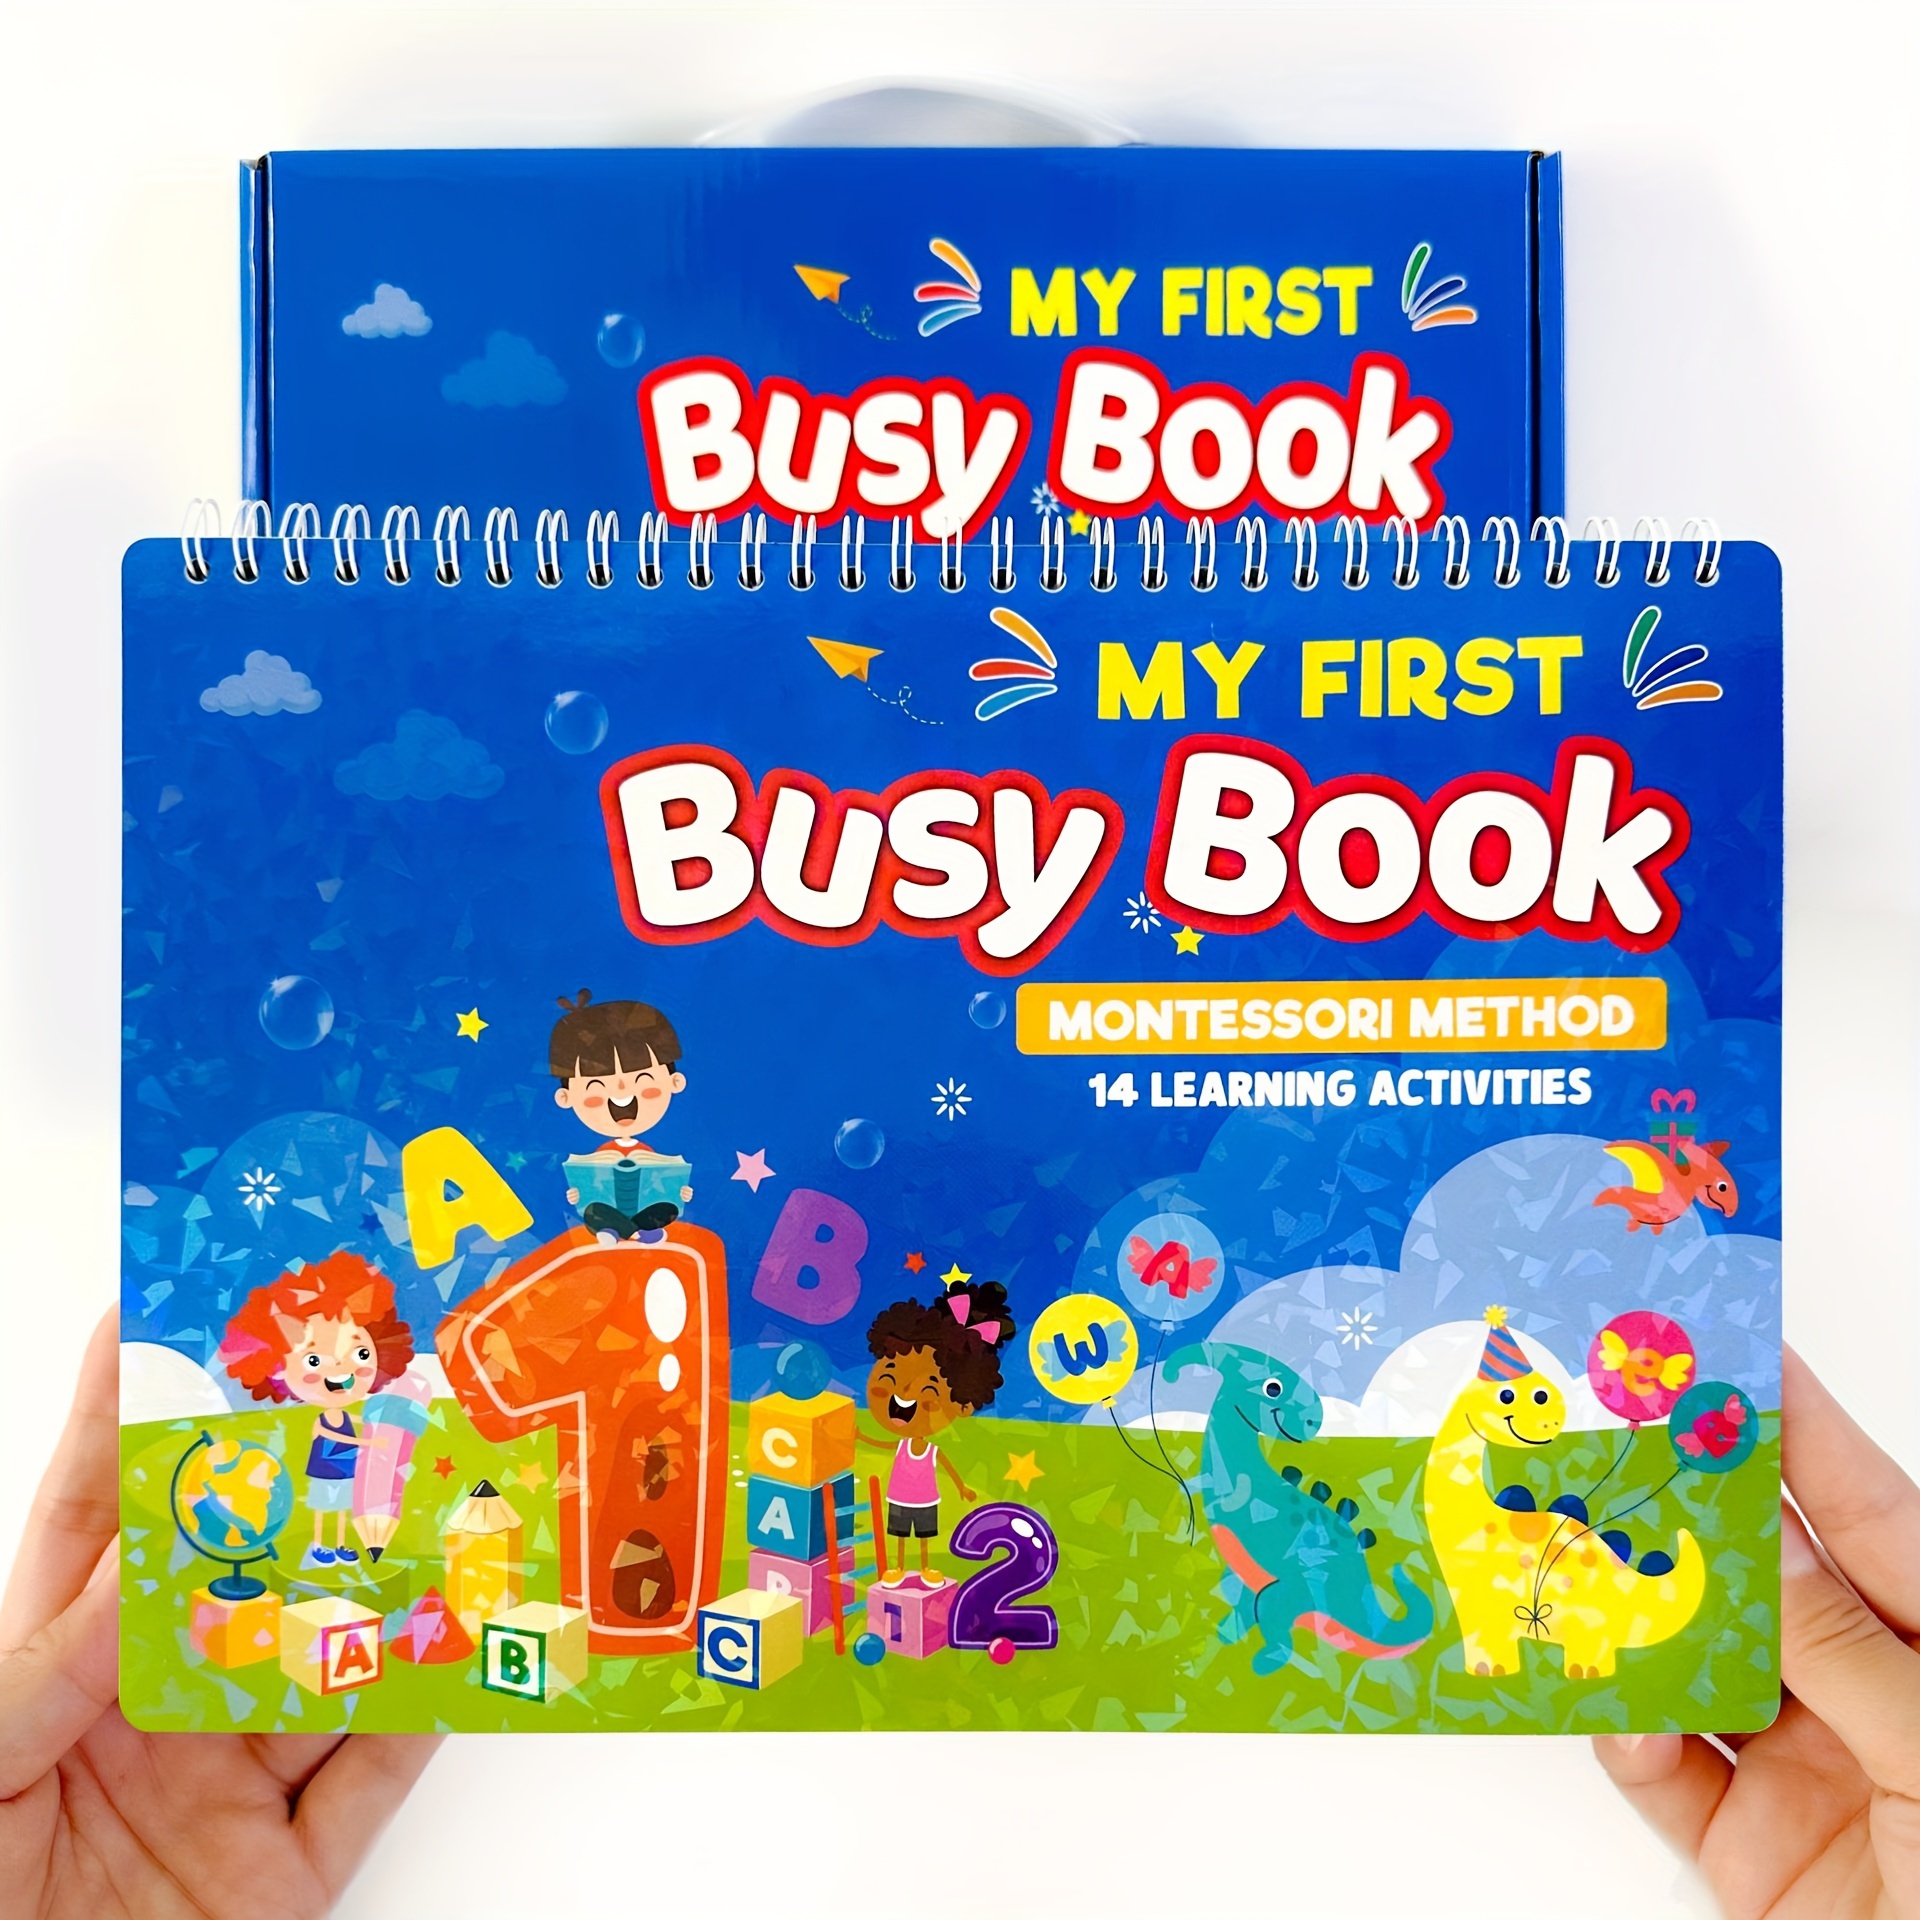 Busy Book For Toddlers - Tribobot x Mom Nessly